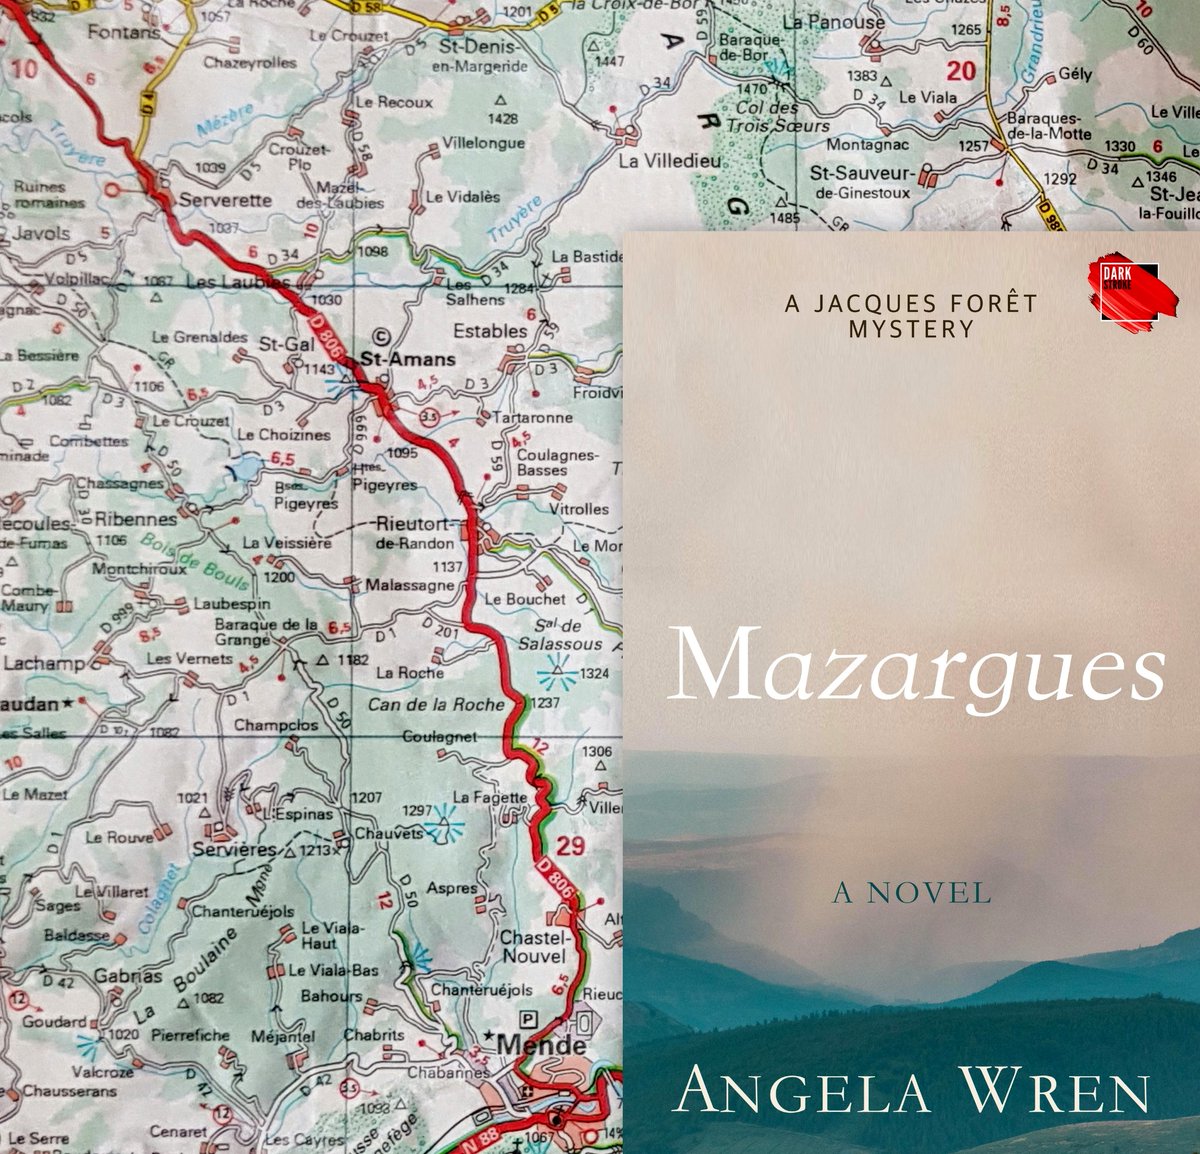 ⭐⭐⭐⭐⭐ #Mazargues
#JacquesForêt rashly accepts a commission to find a missing painting. His unrelenting search leads him to a network of secrecy, lies, & a dead body.  Who is the victim?
author.to/JacquesForet

📚📔#CosyCrime #Cévennes #JacquesForêtMysteries #JamesetMoi